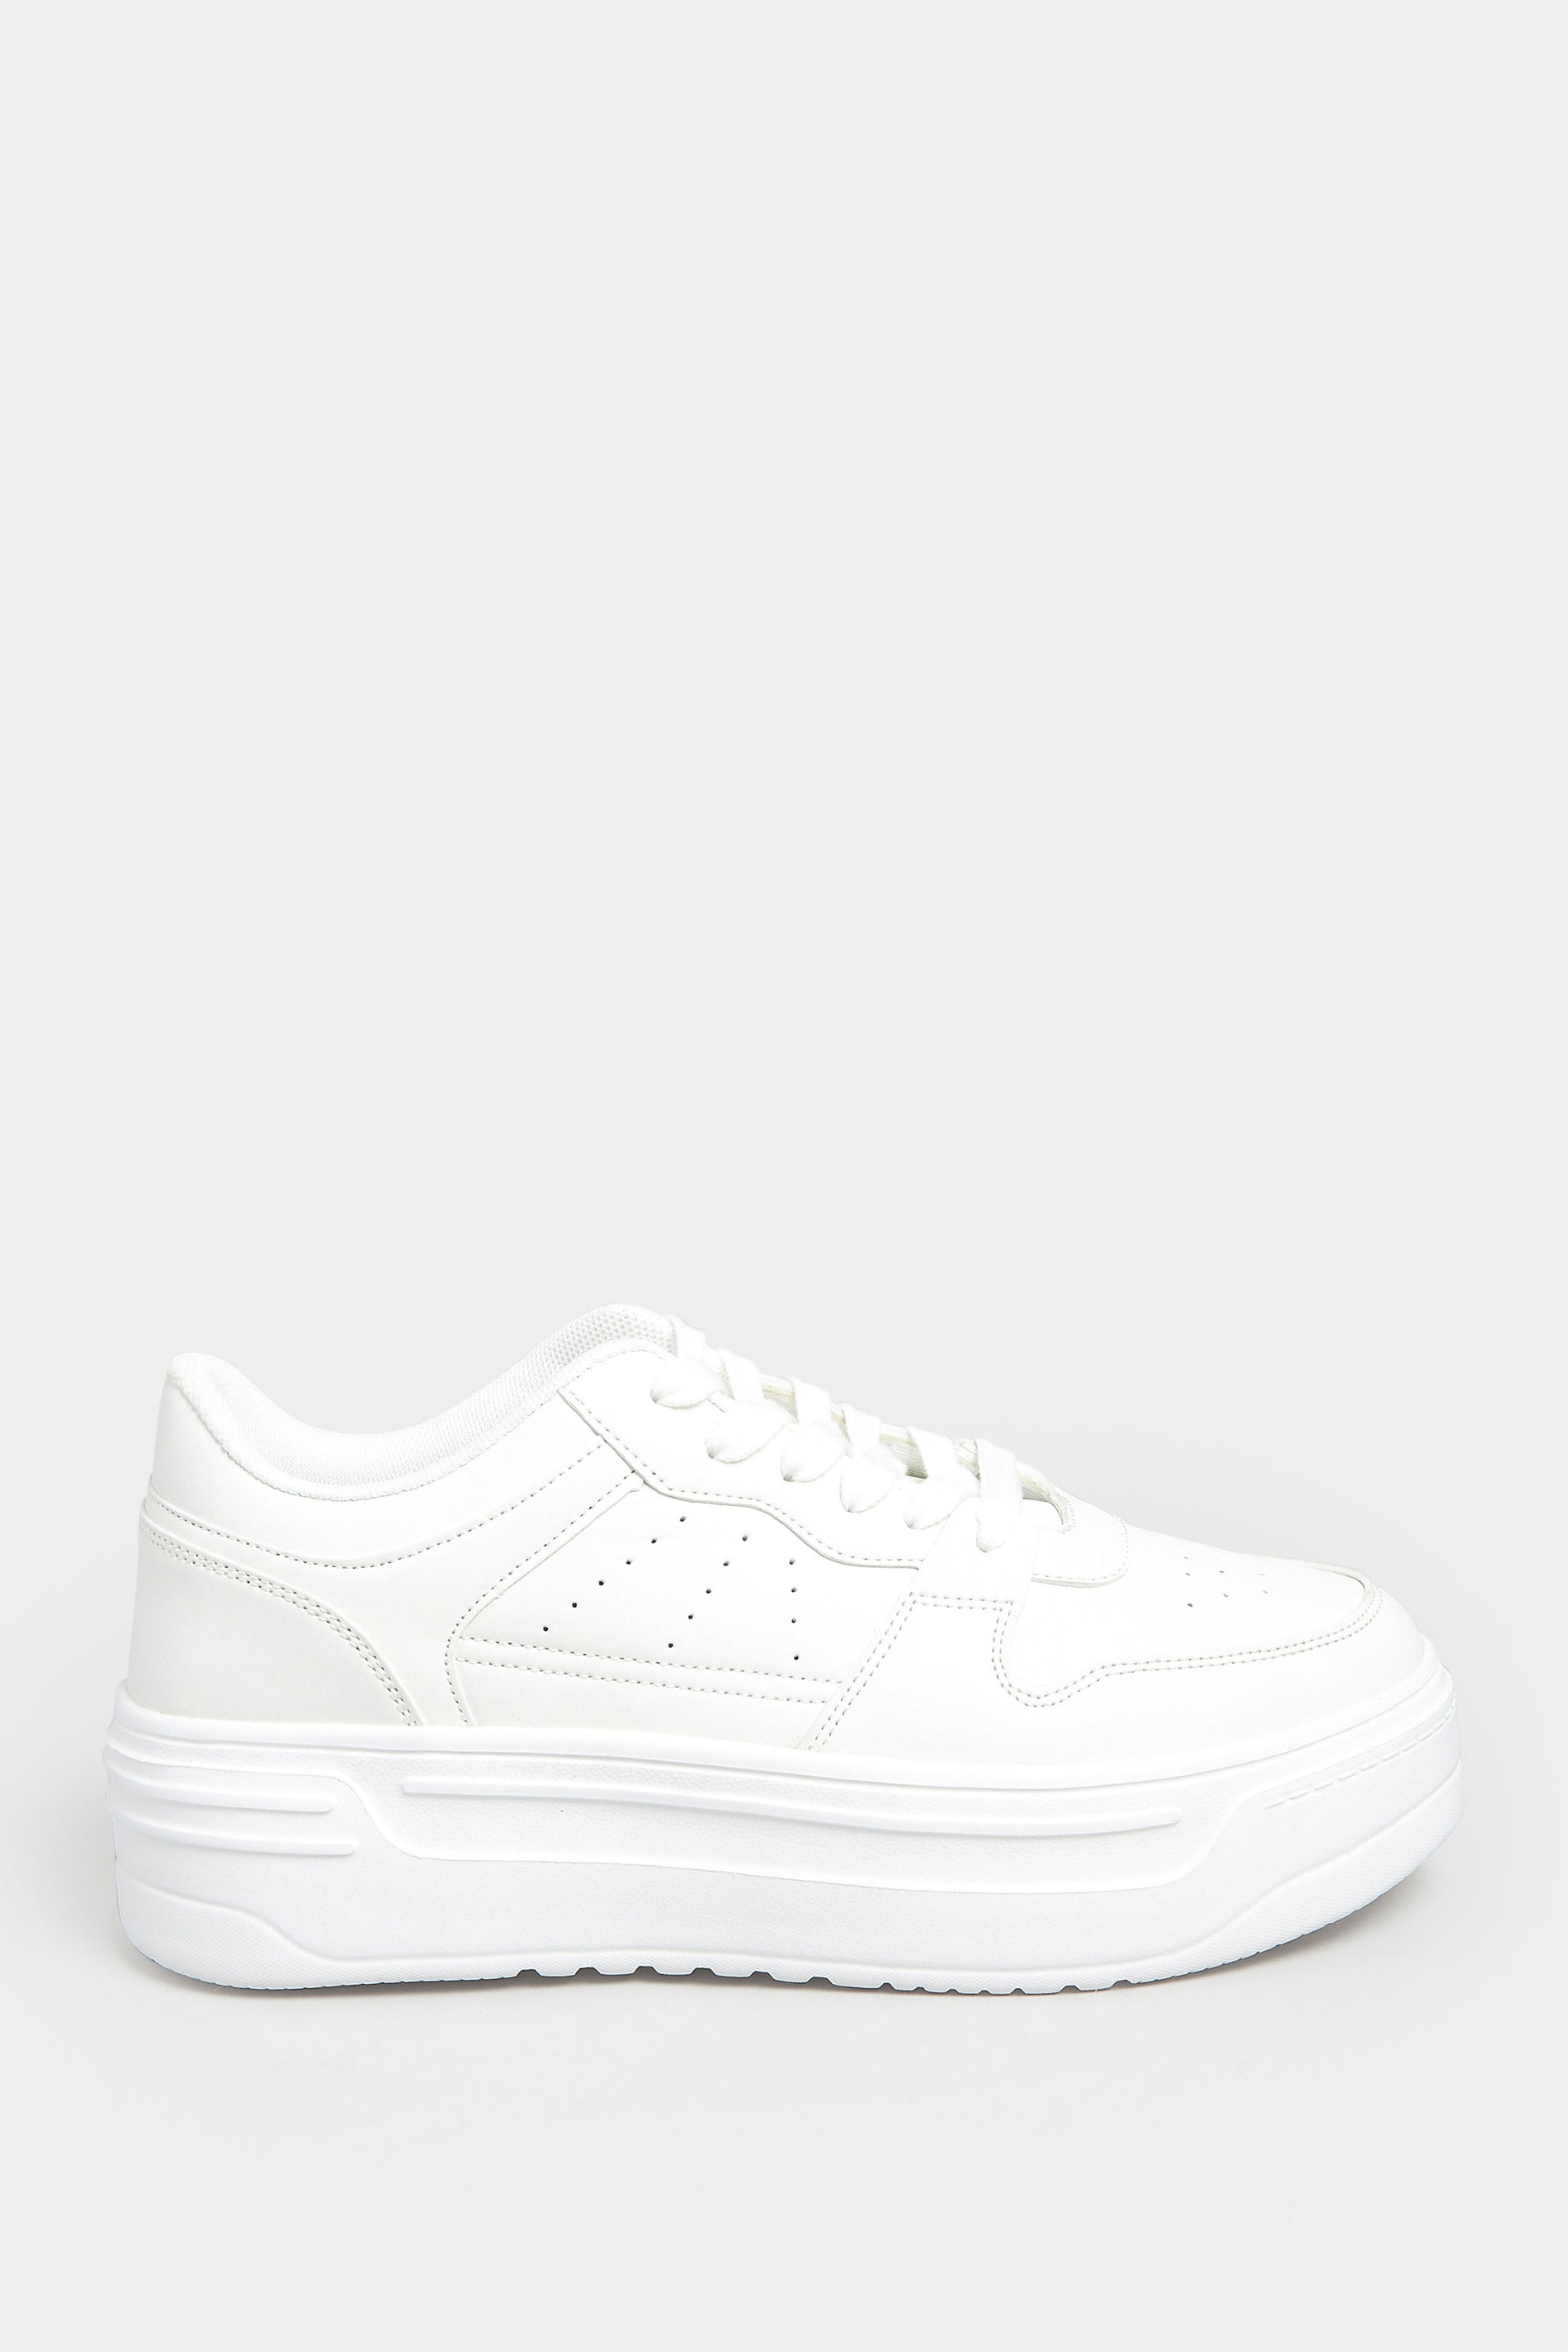 LIMITED COLLECTION White Super Chunky Trainers In Extra Wide EEE Fit | Yours Clothing 3